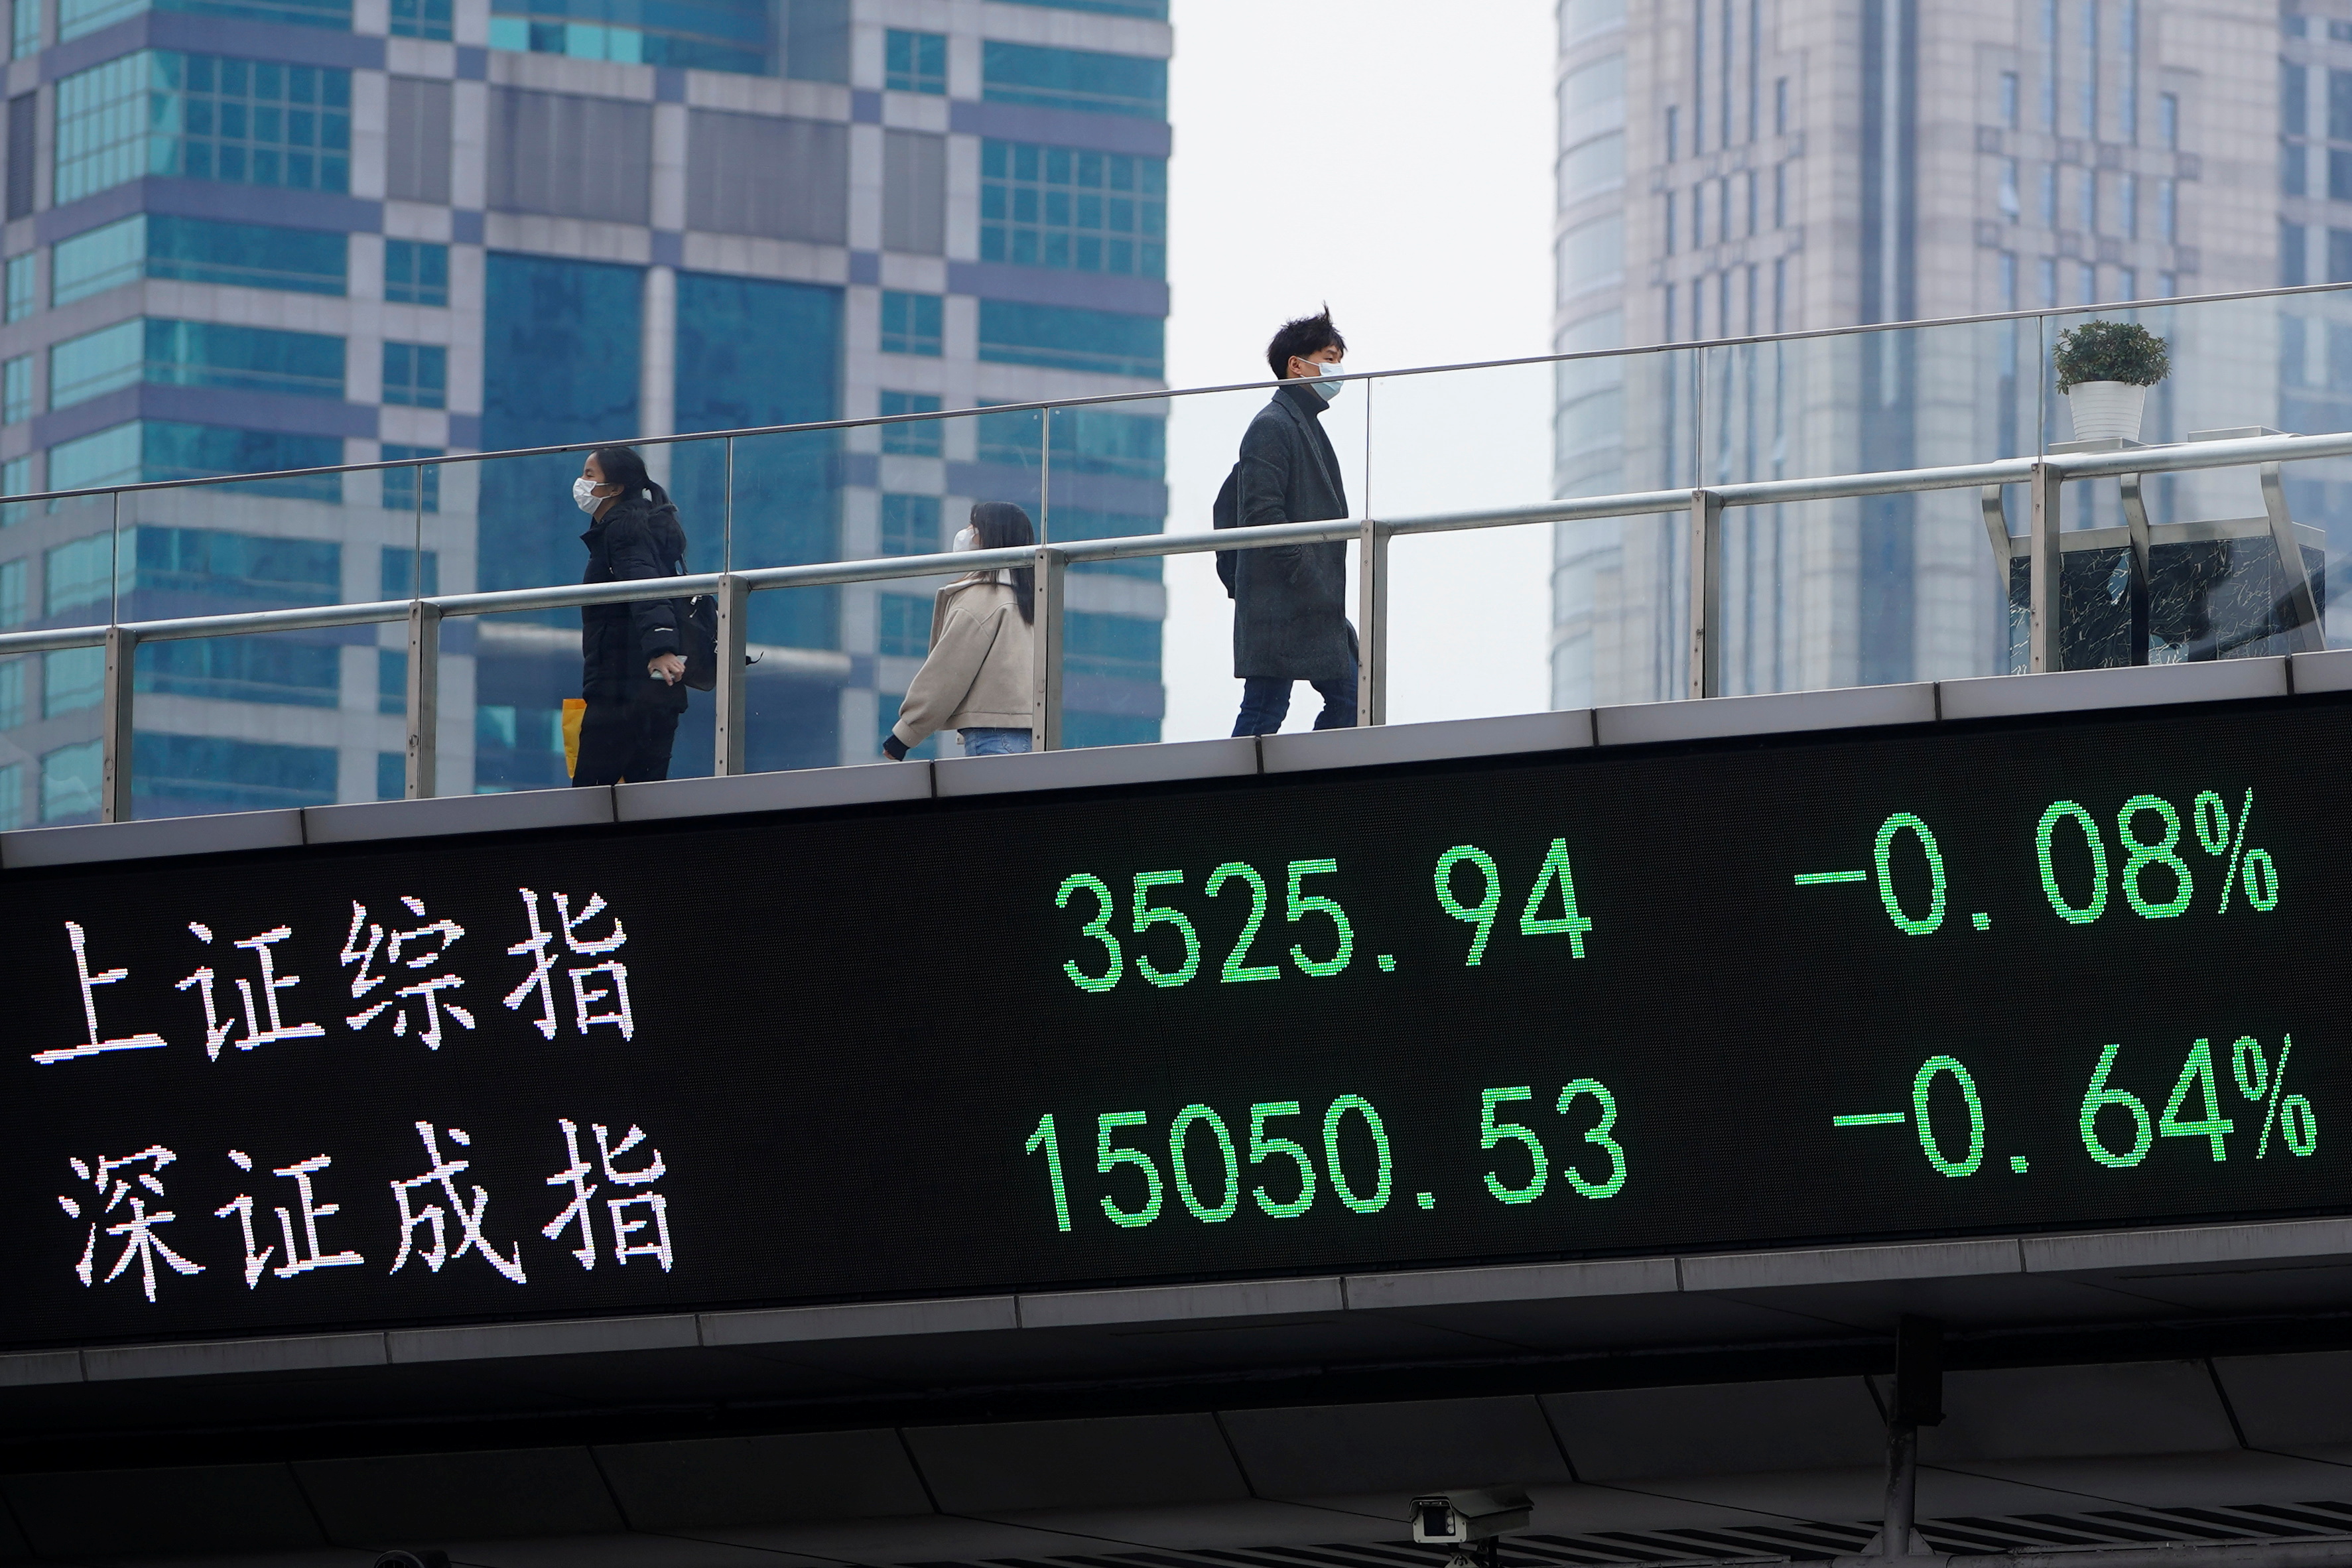 People wearing masks, following the coronavirus disease (COVID-19) outbreak, walk on an overpass with an electronic board showing Shanghai and Shenzhen stock indexes, at the Lujiazui financial district in Shanghai